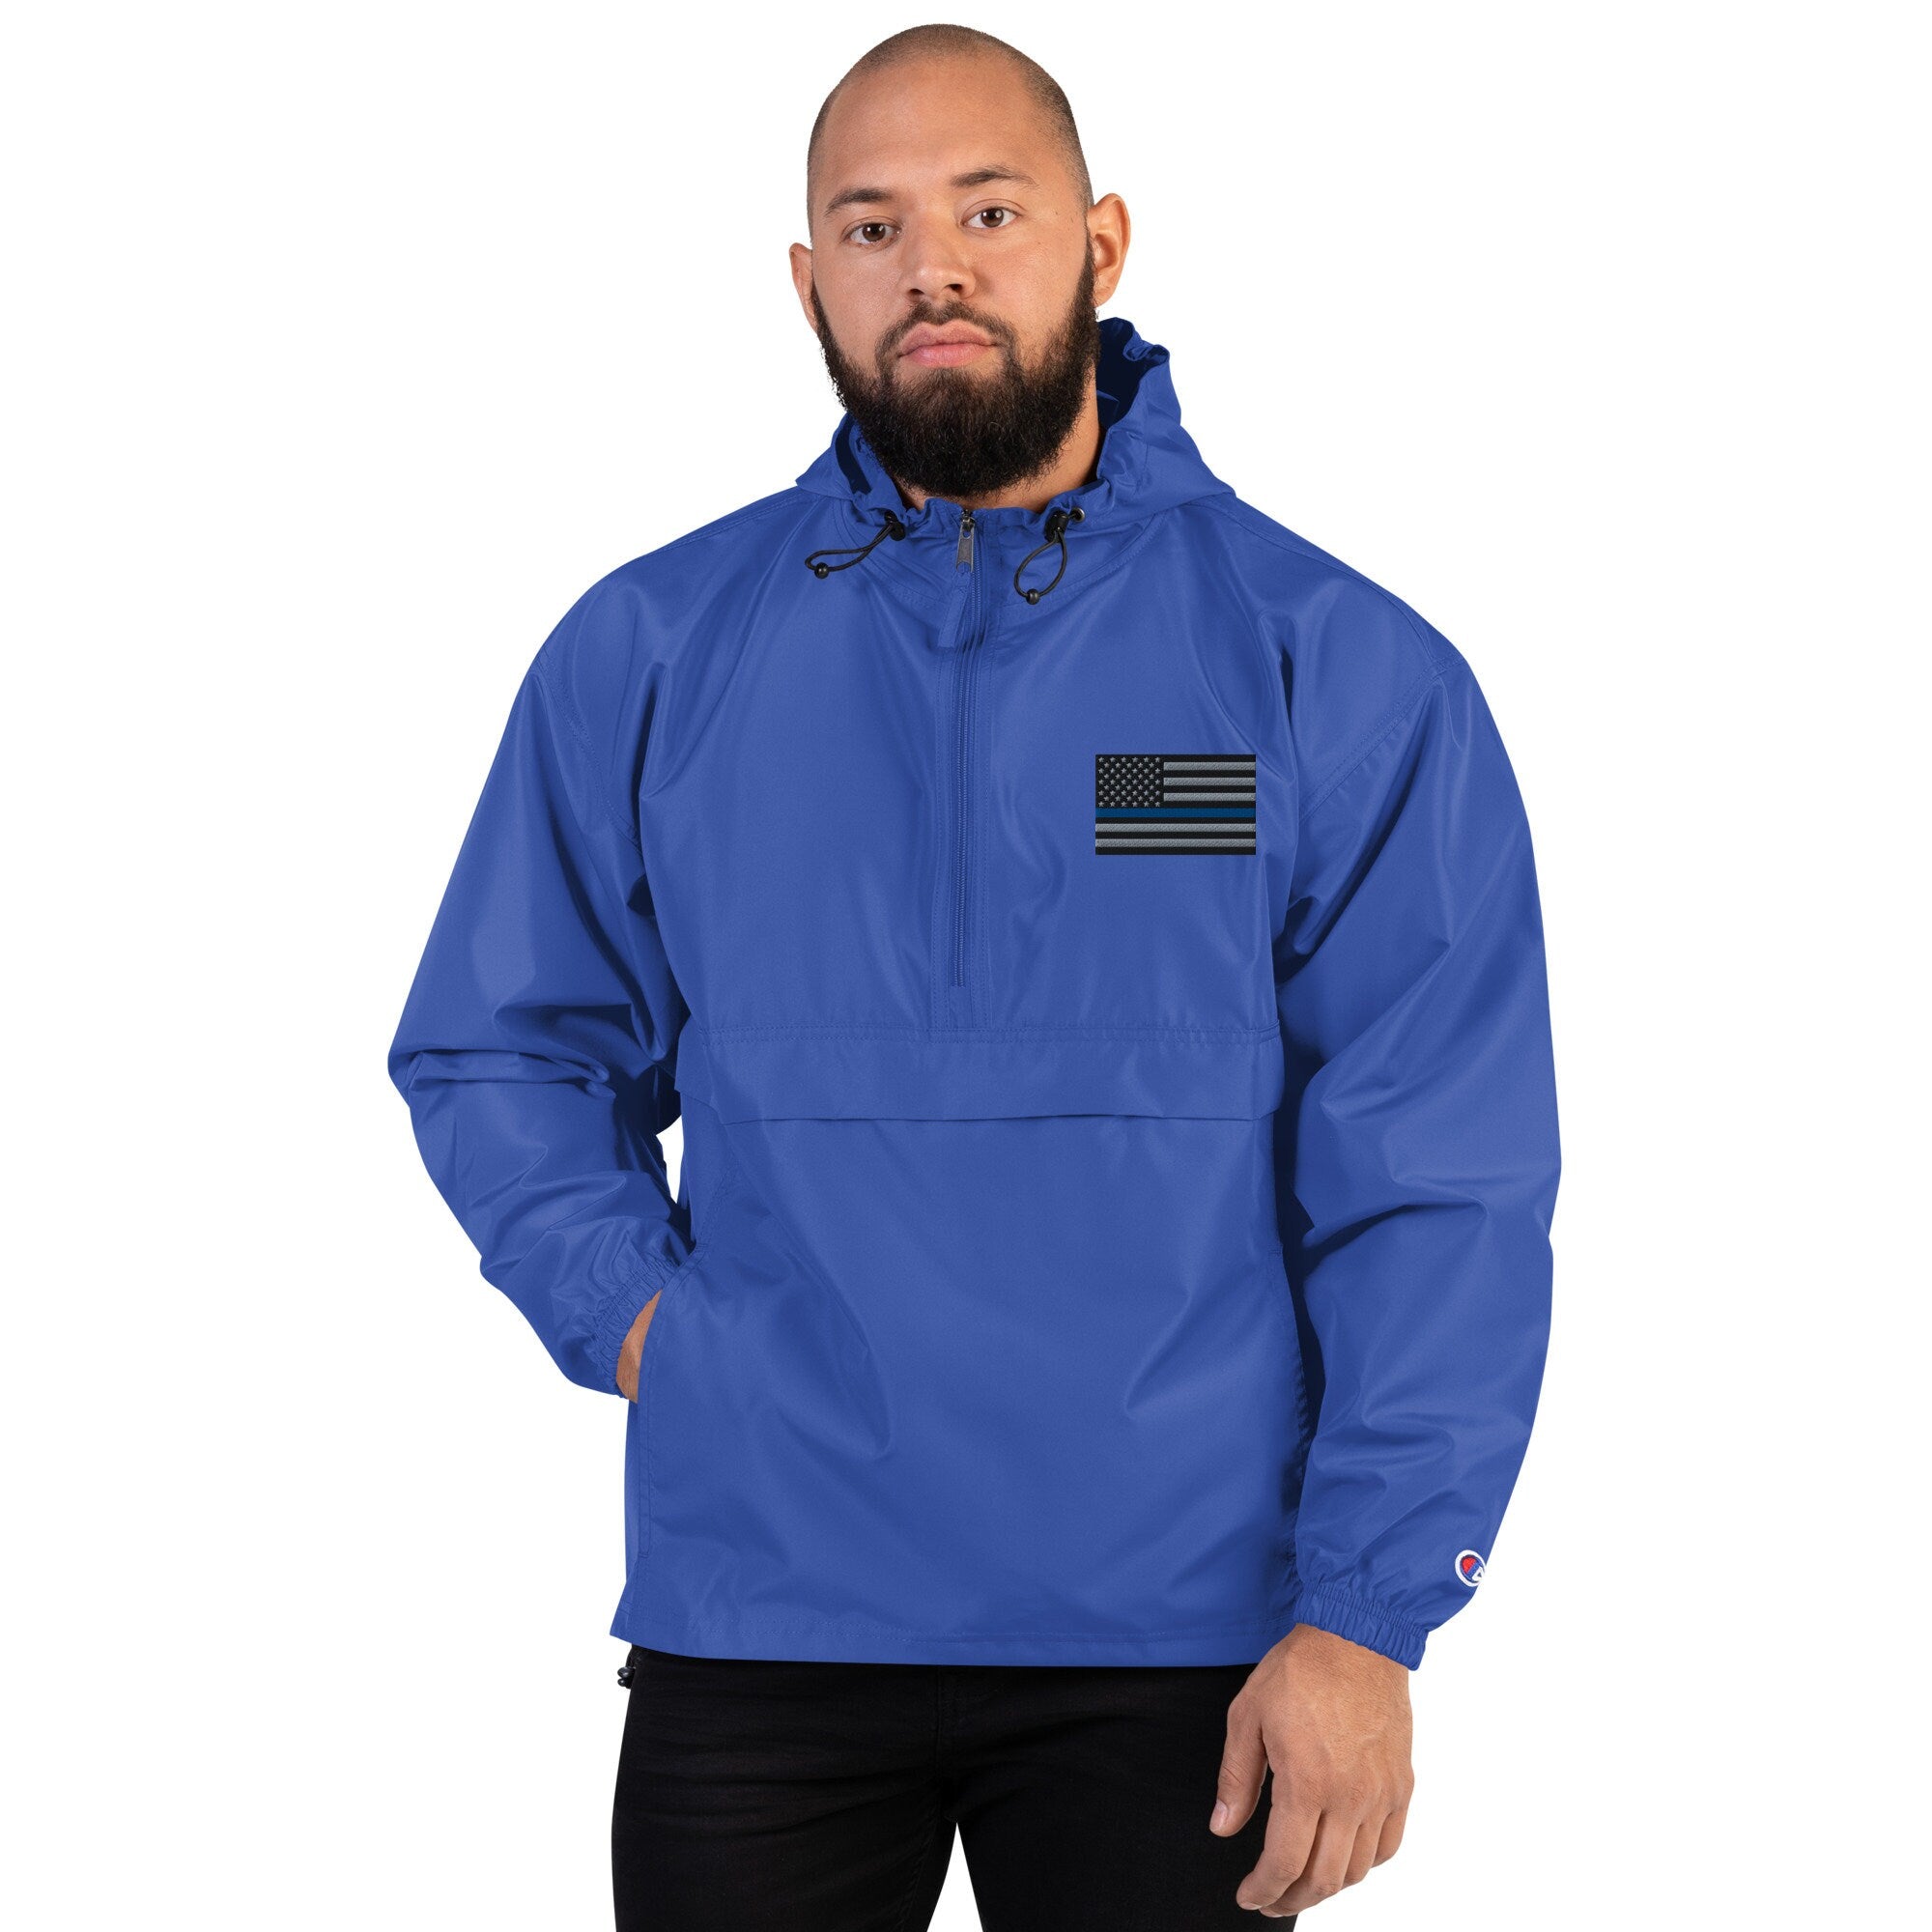 Unisex Embroidered Thin Blue Line Flag Champion Packable Jacket